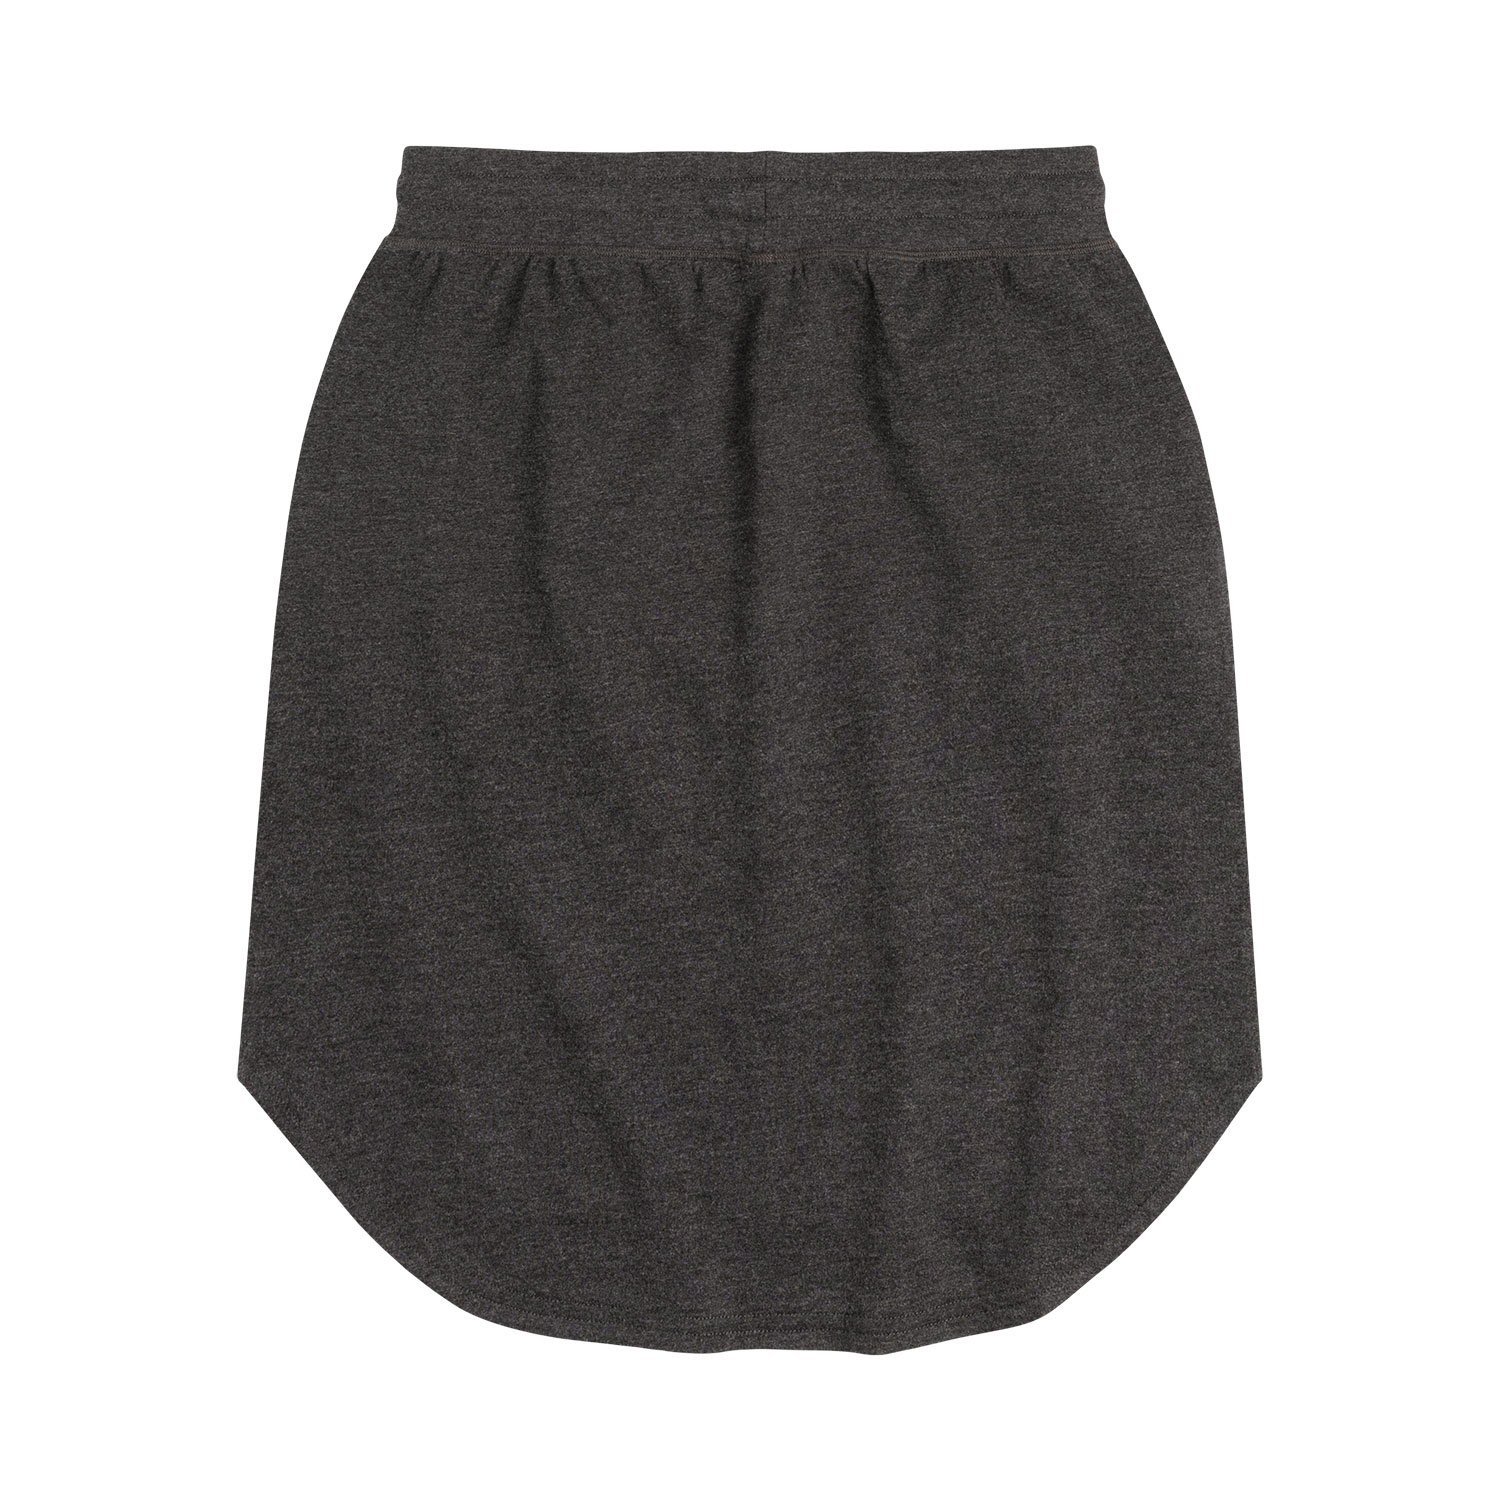 Instant Message - Be Kind - Women's Weekend Skirt - image 3 of 4